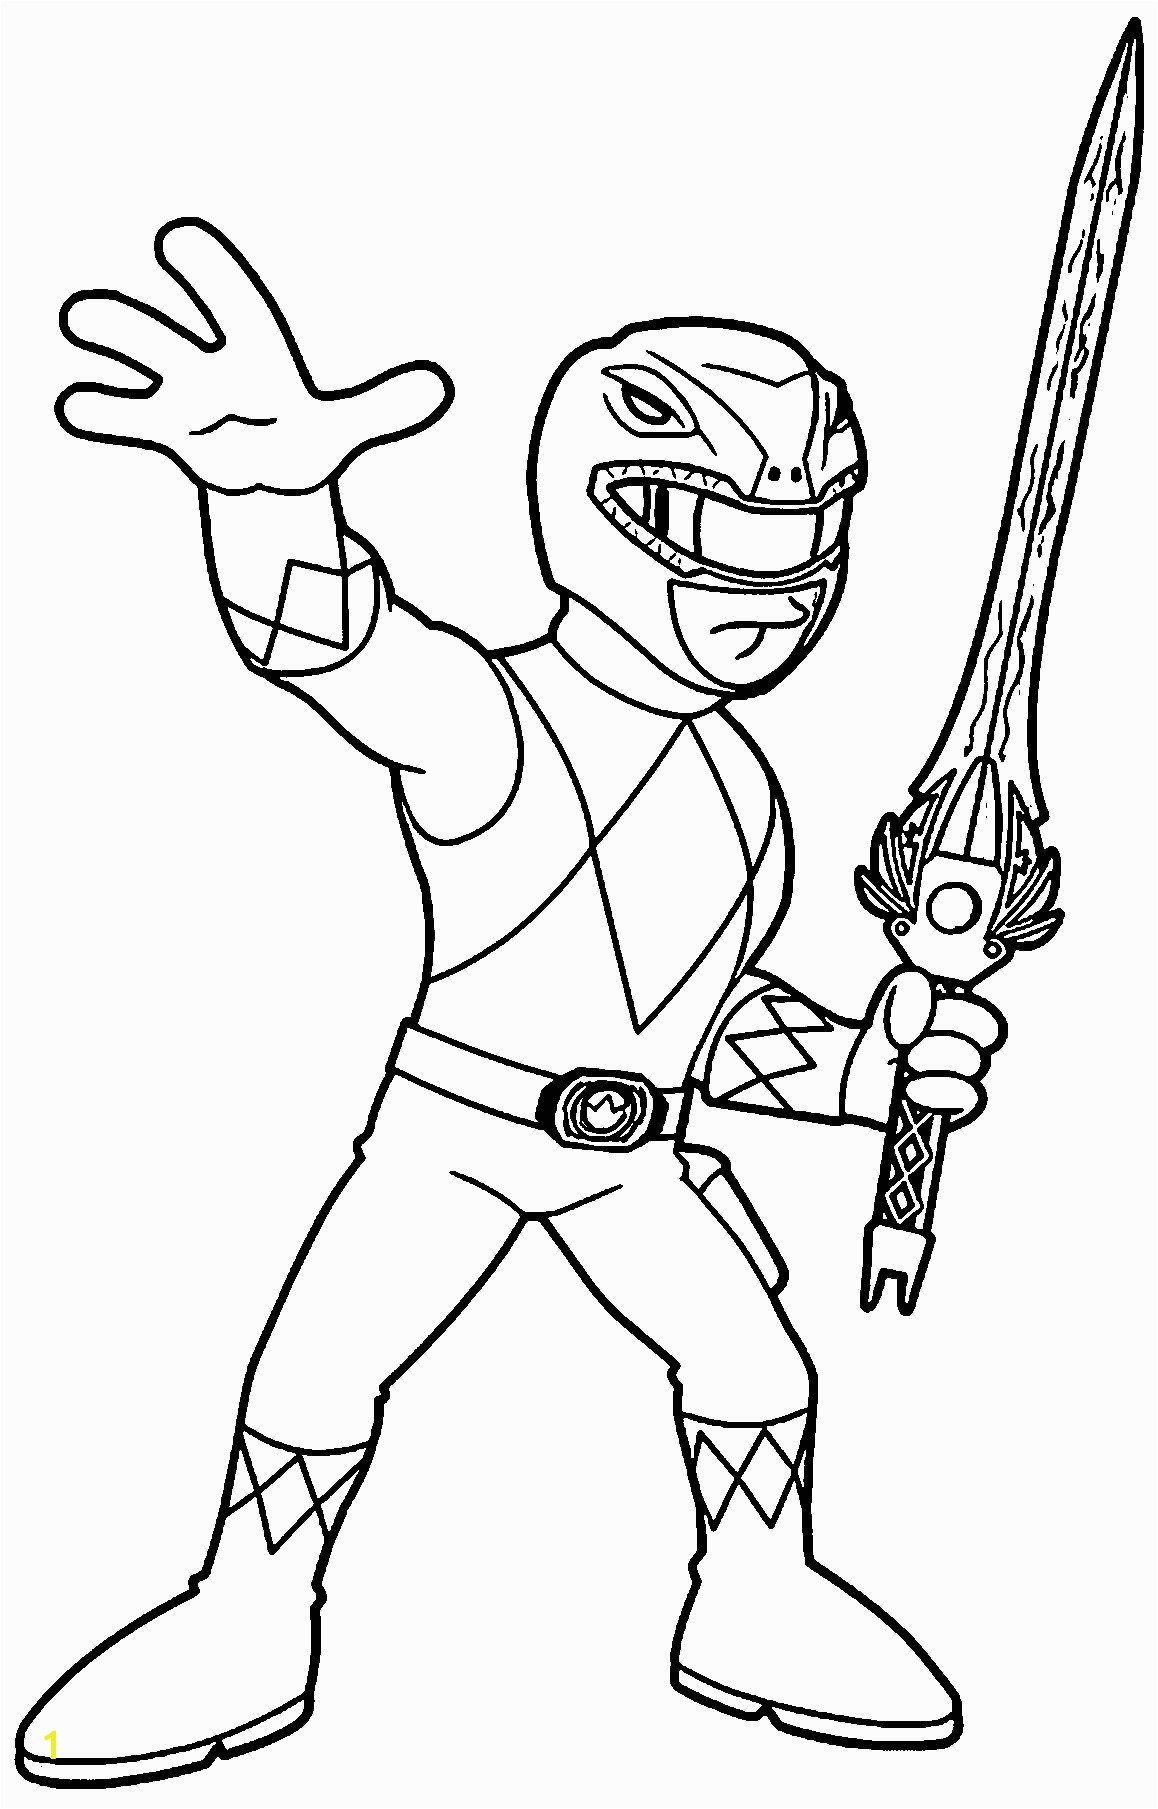 Power Ranger Coloring Pages Green Power Ranger Coloring Page Power Ranger Coloring Pages Nice